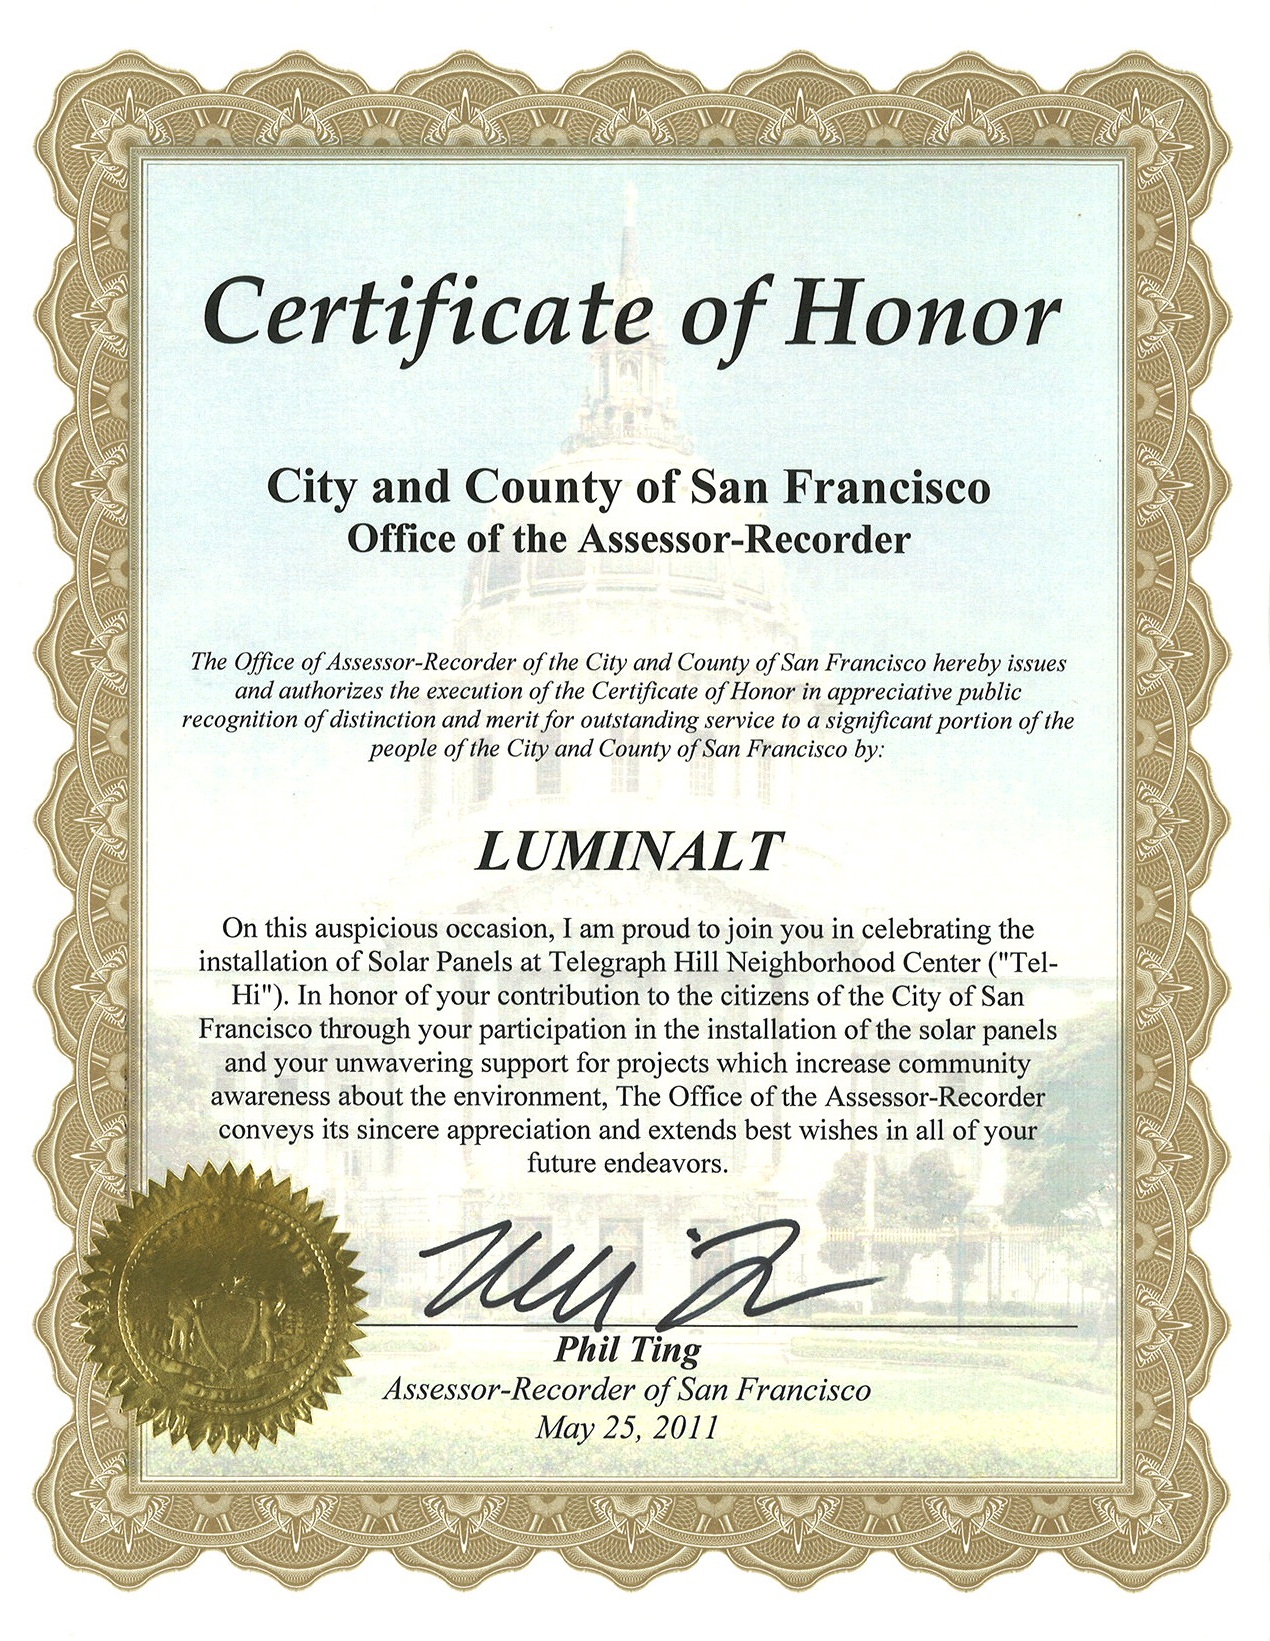 Certificate of Honor community service solar installer Phil Ting